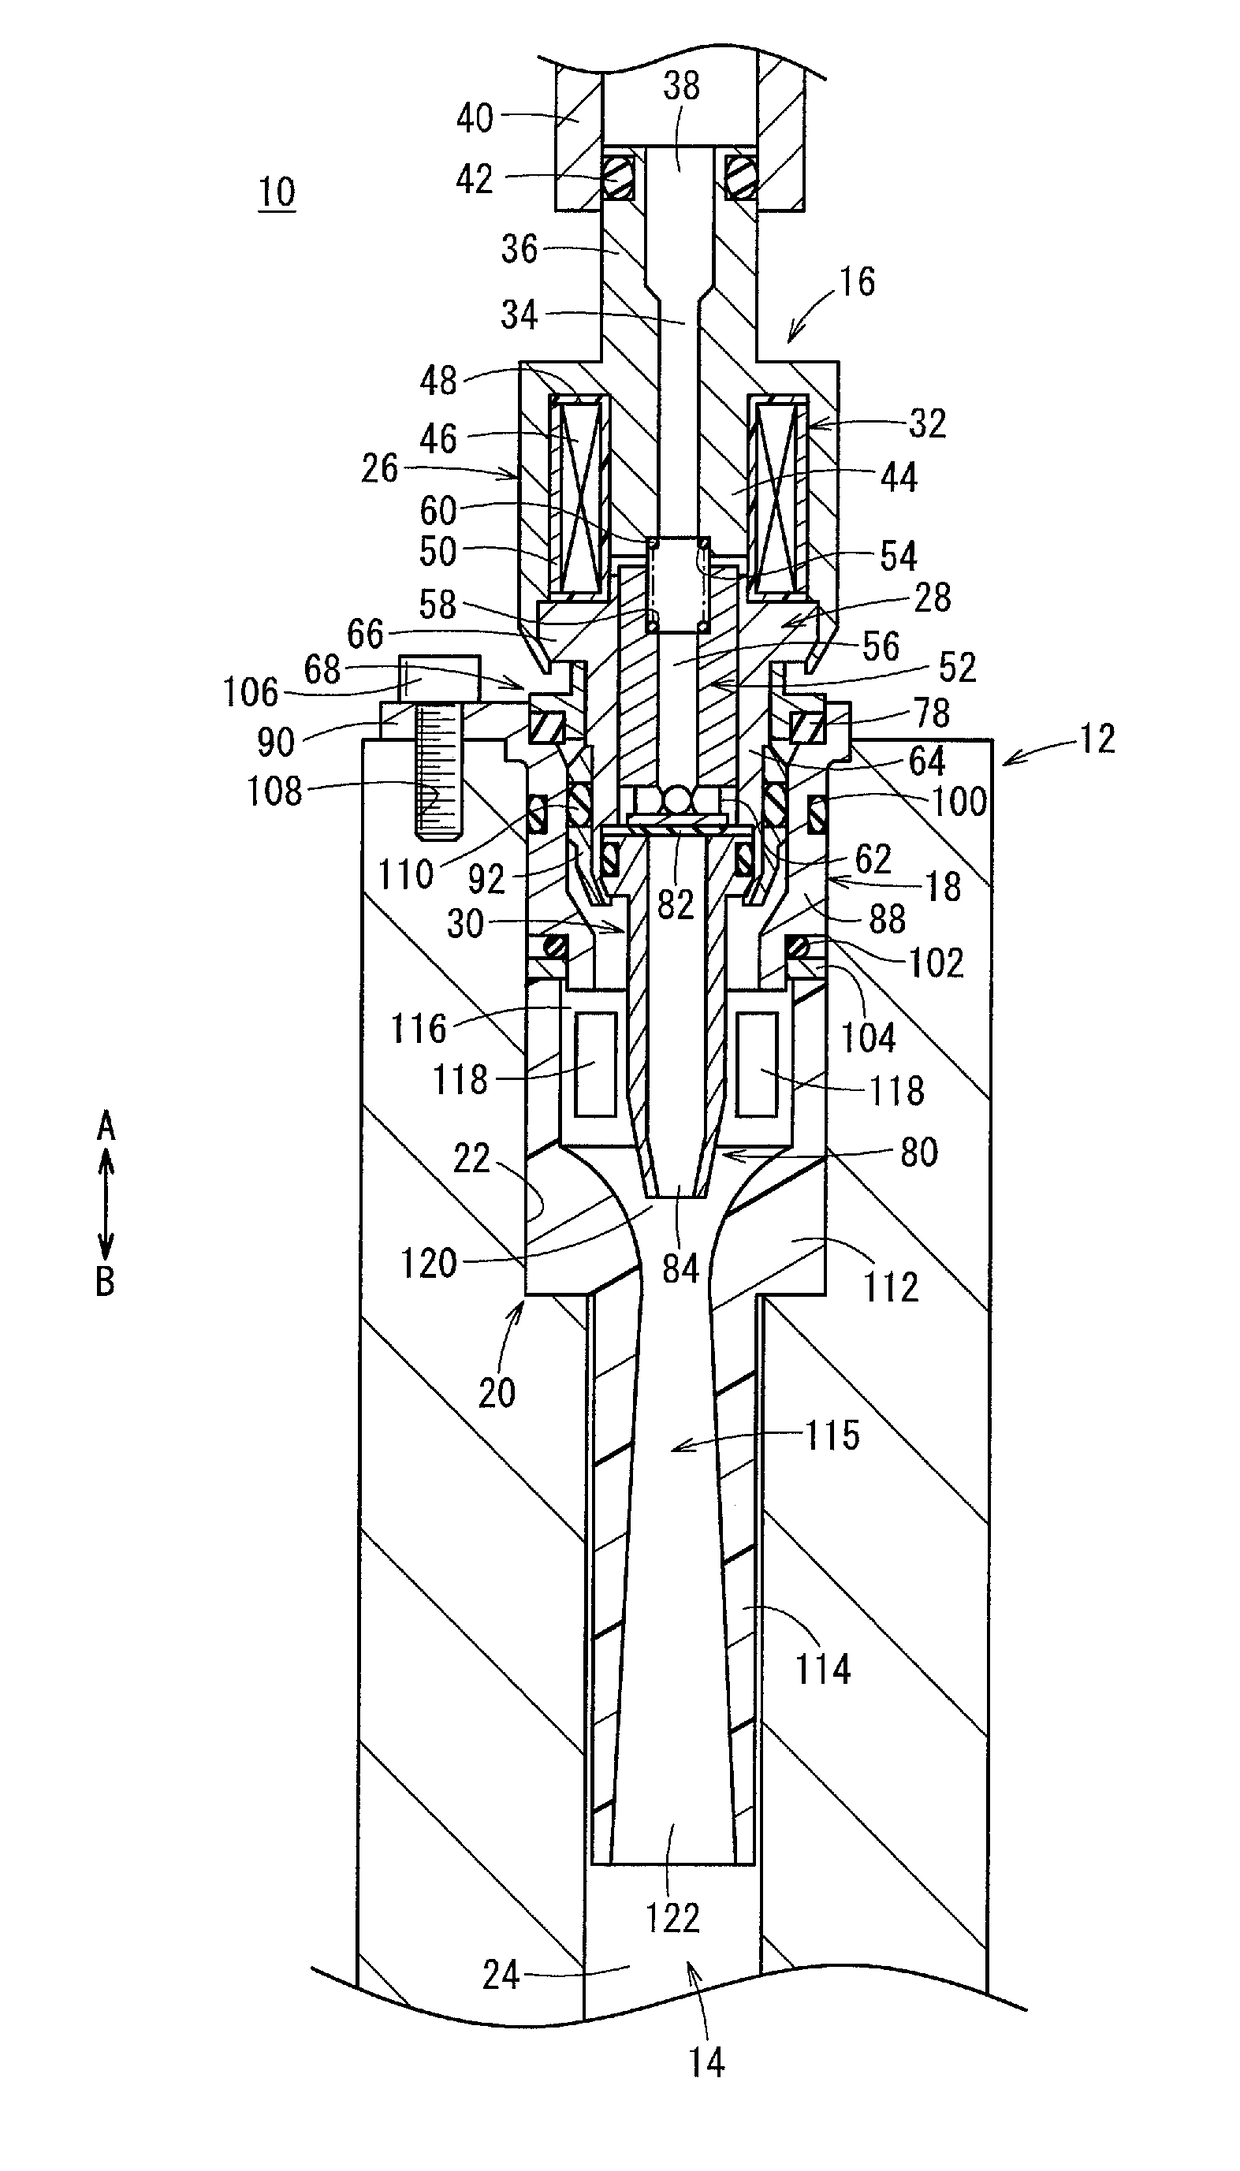 Hydrogen injection apparatus